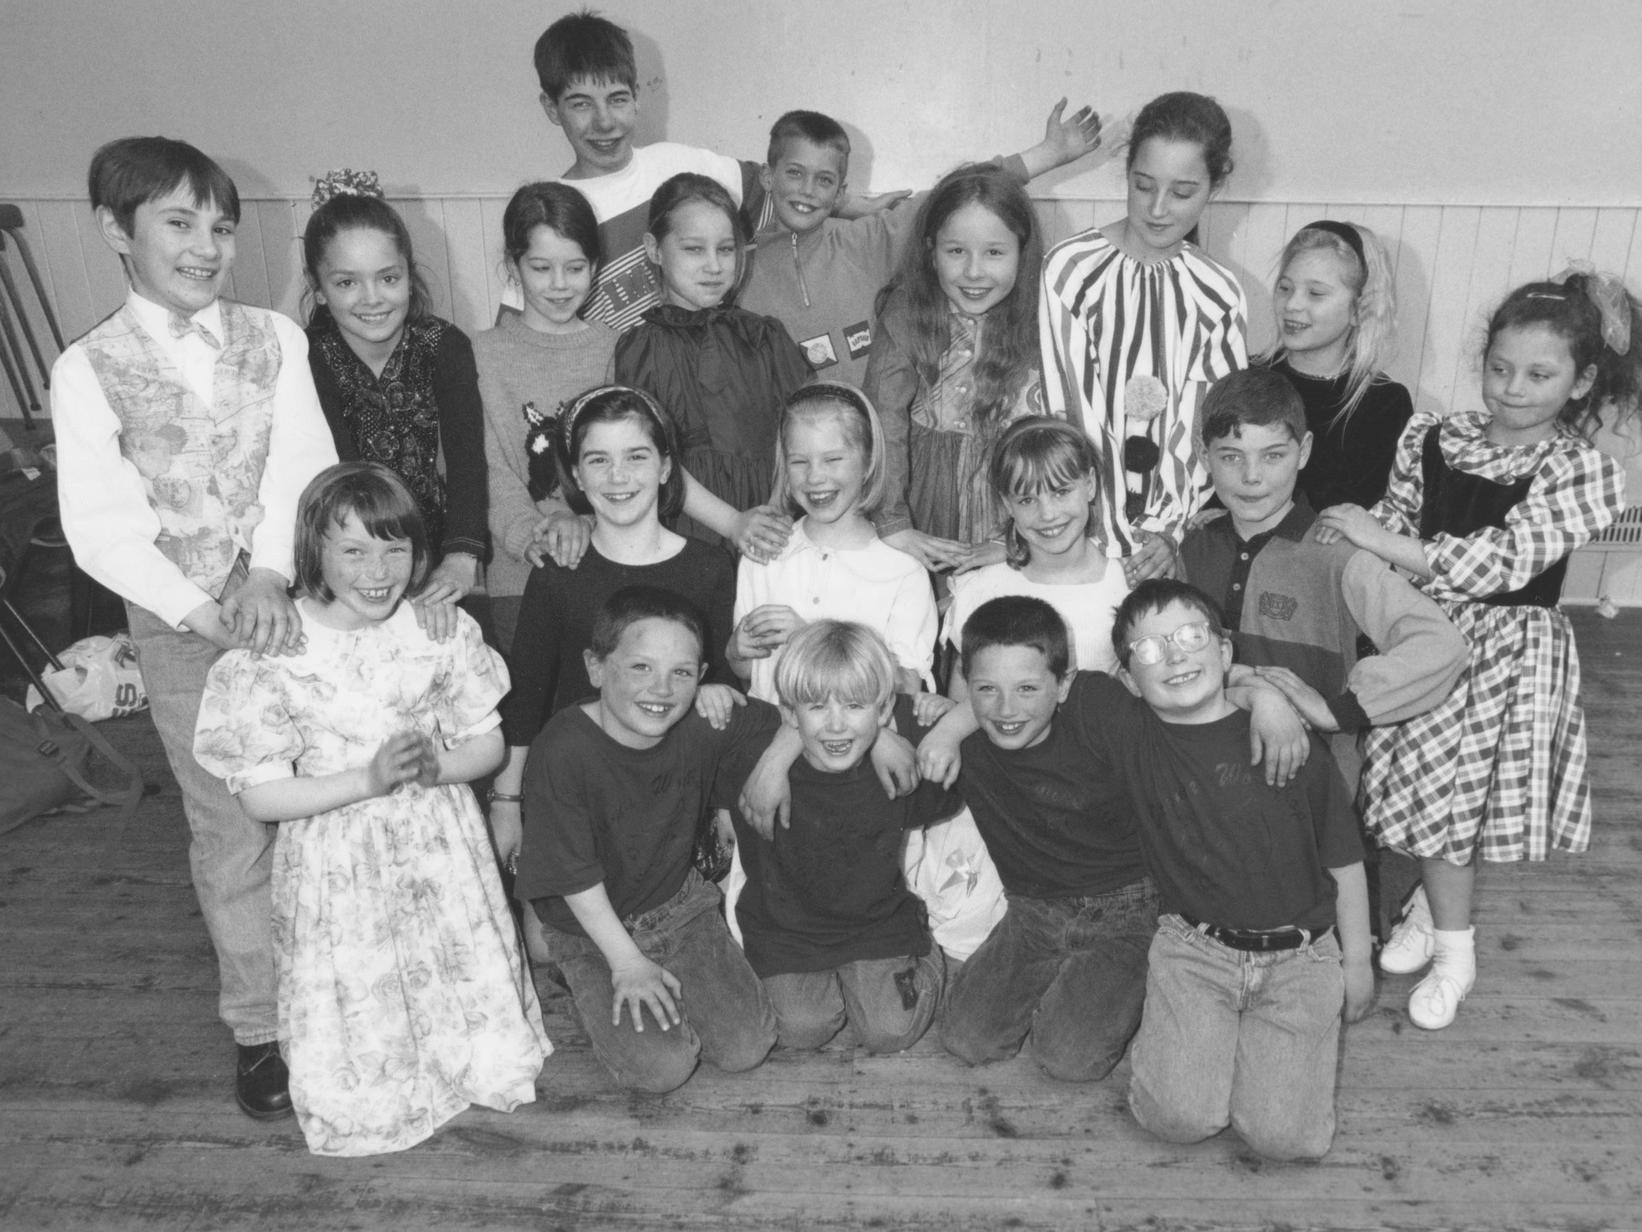 Pictured during their dress rehearsals in April 1994 are children from the YMCA who will perform in Snow White and Bugsy Malone.